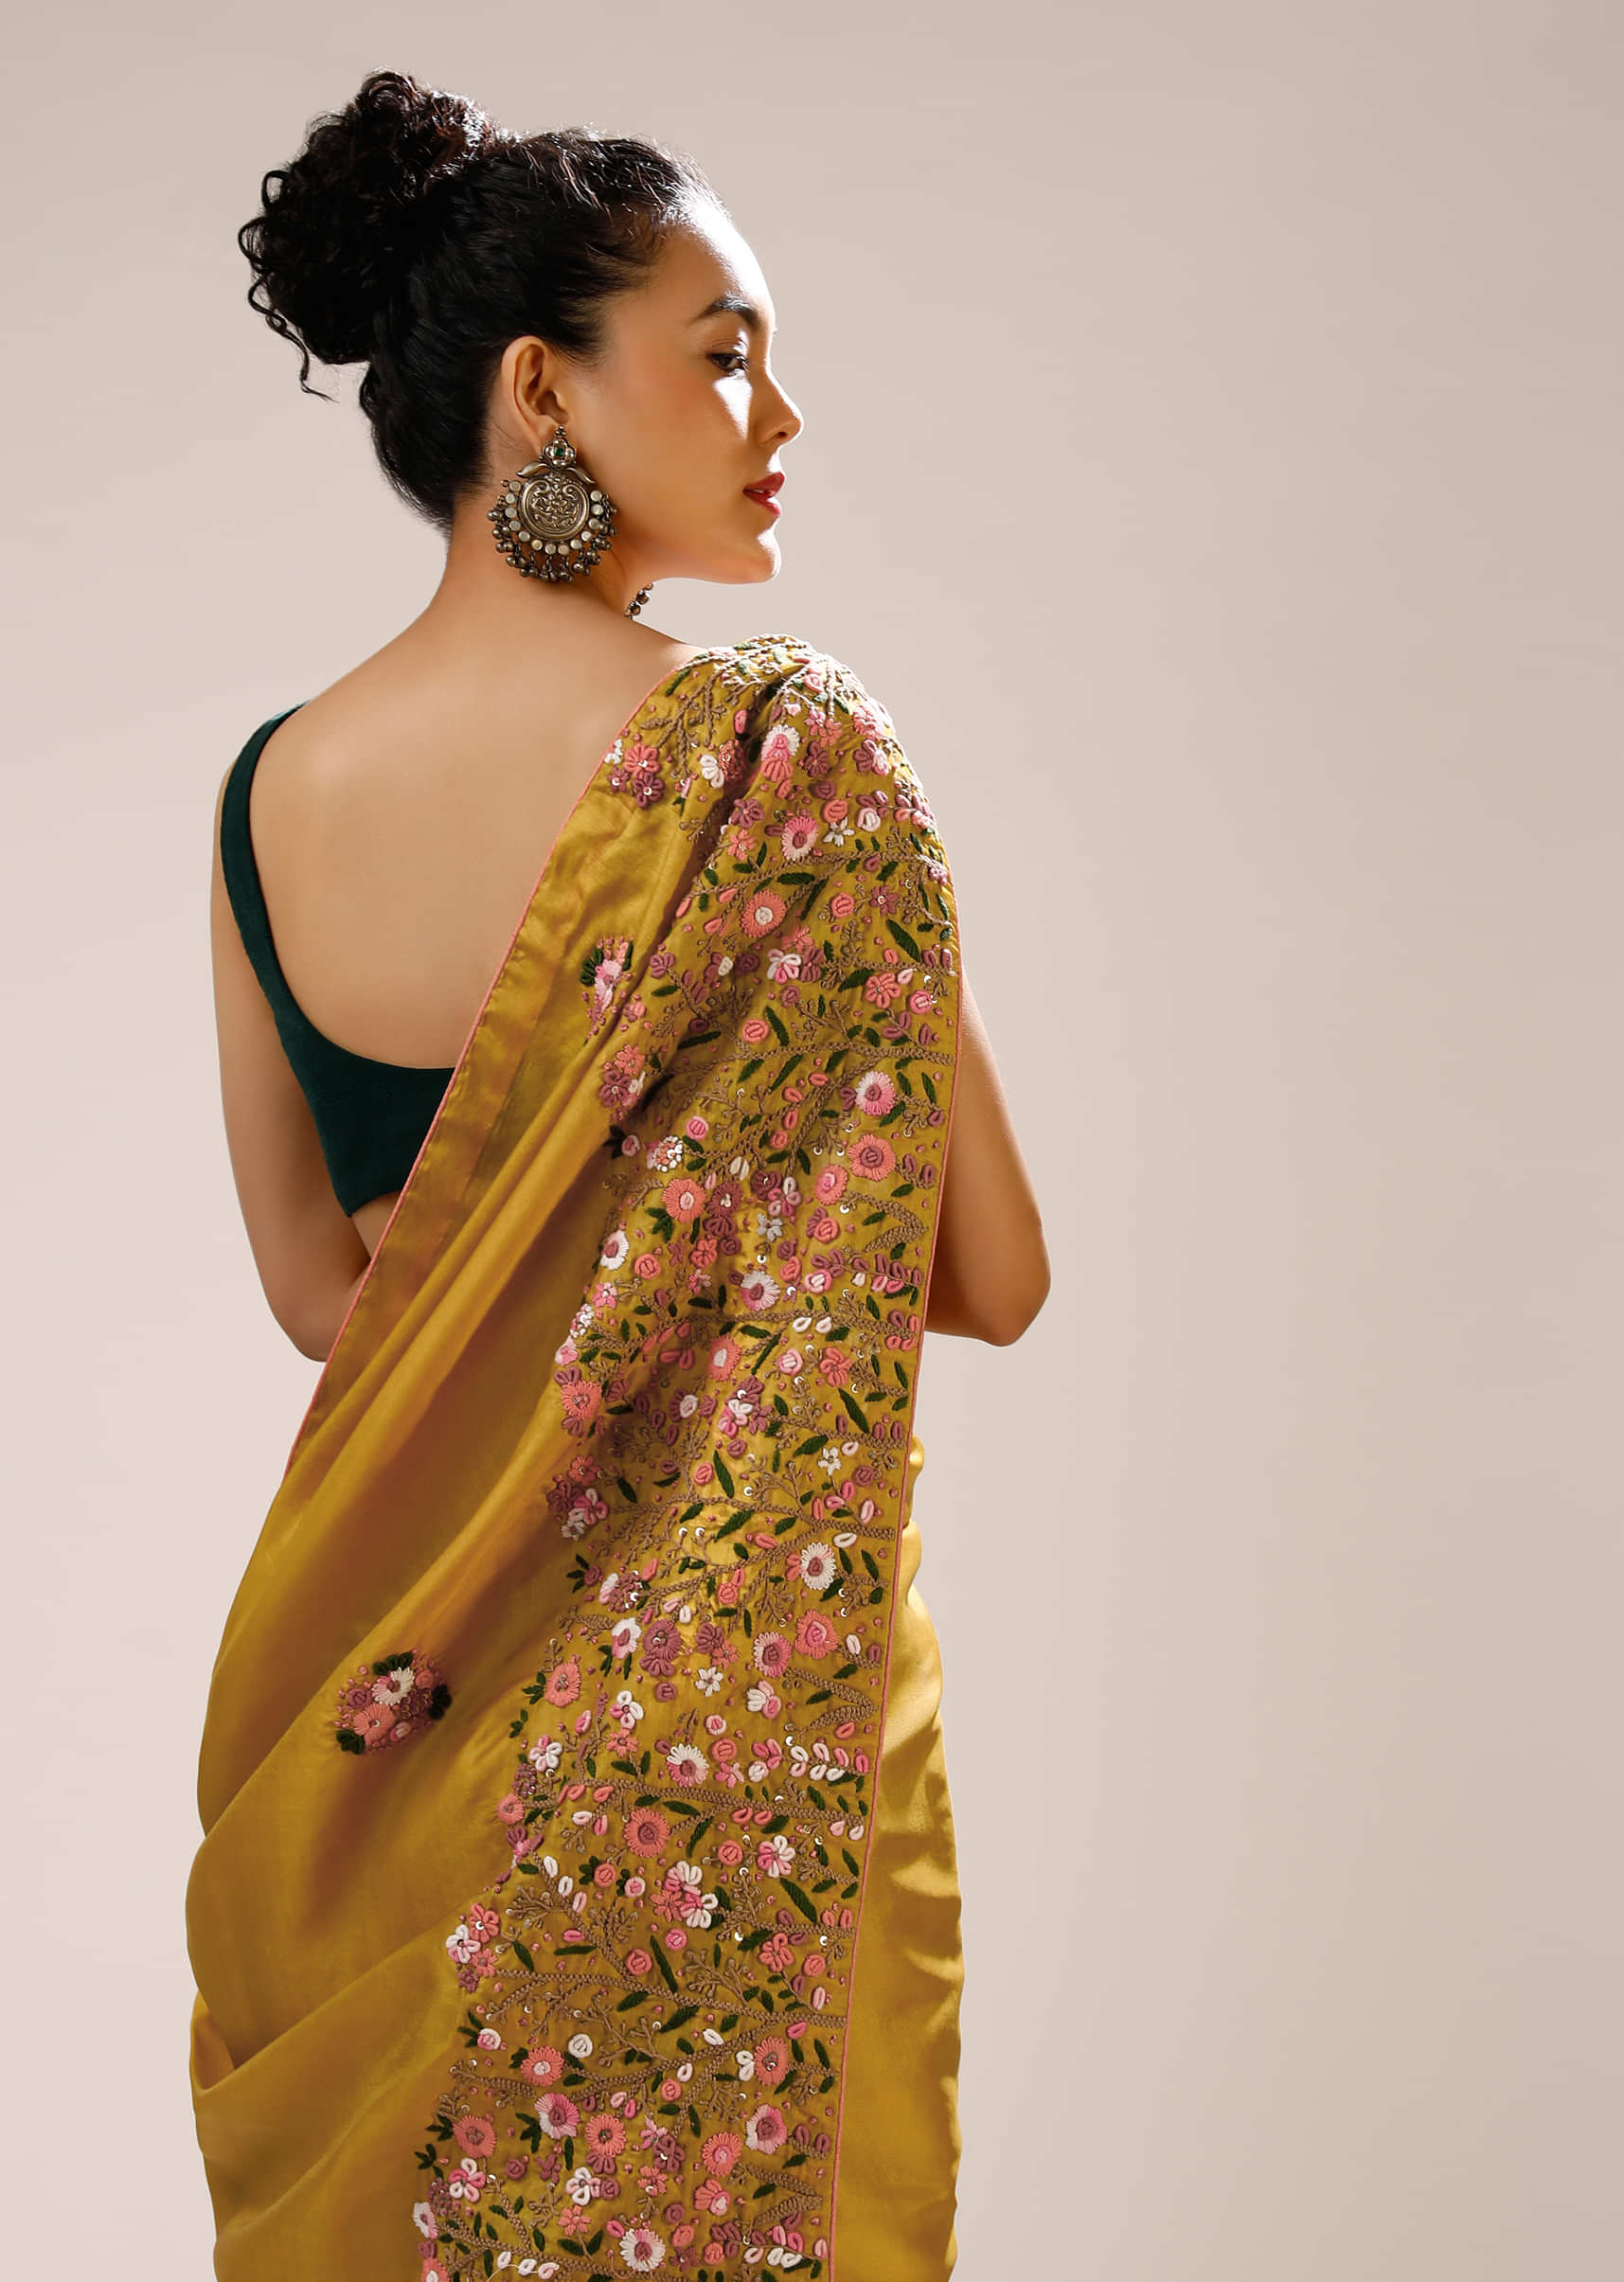 Honey Gold Saree In Dupion Silk With Multi Colored Bud Embroidered Floral Buttis And Heavy Pallu Design  